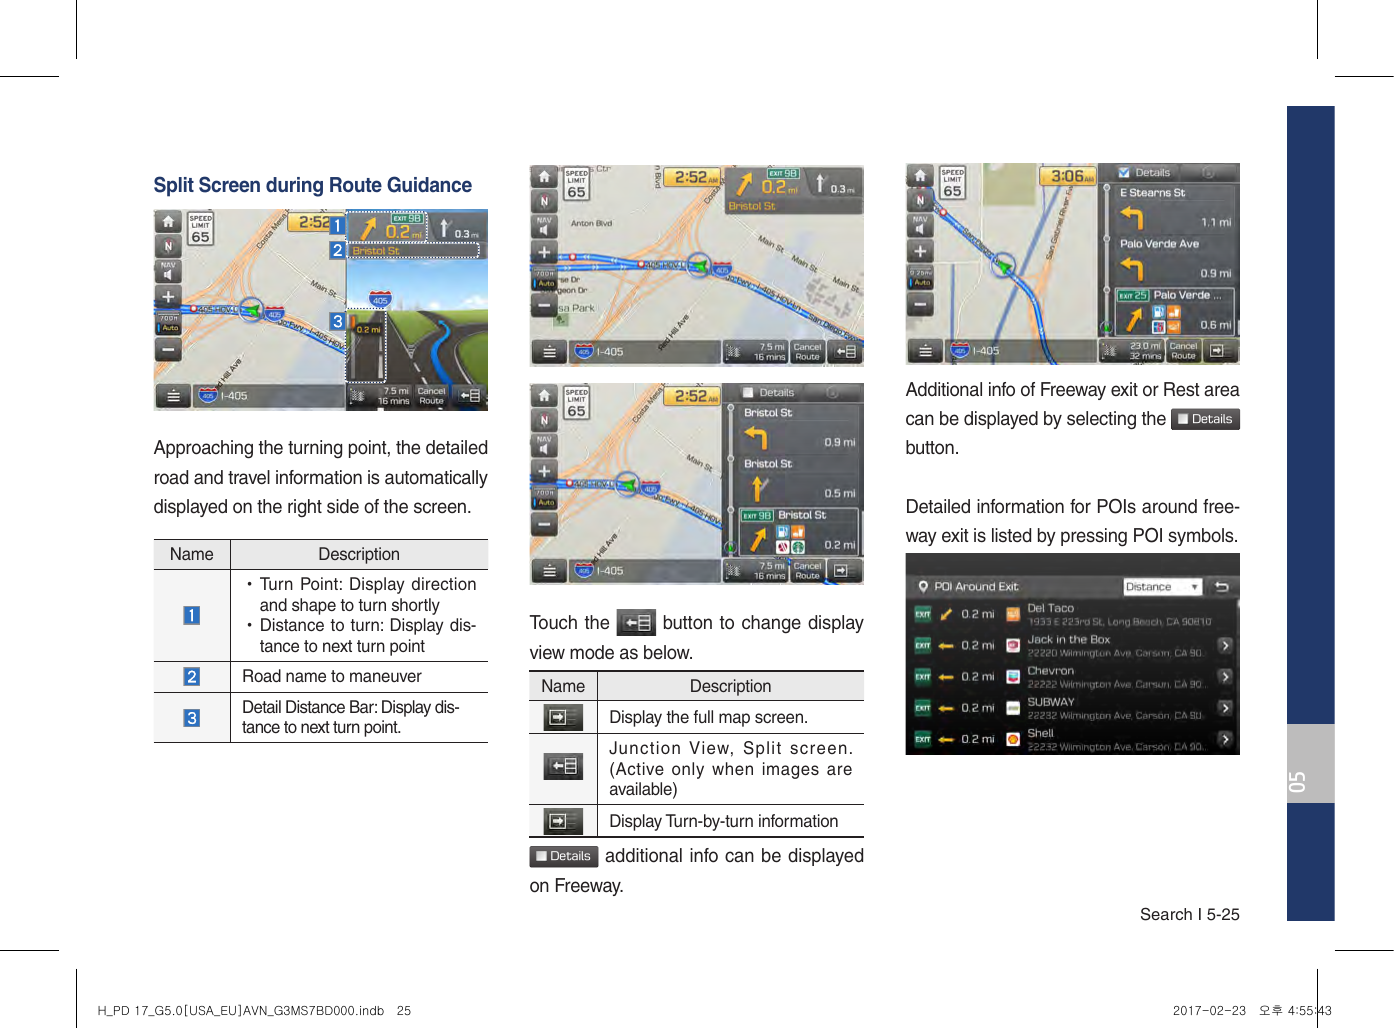 Search I 5-250505Split Screen during Route GuidanceApproaching the turning point, the detailed road and travel information is automatically displayed on the right side of the screen.Touch the   button to change display view mode as below. Details additional info can be displayed on Freeway.Additional info of Freeway exit or Rest area can be displayed by selecting the  Detailsbutton. Detailed information for POIs around free-way exit is listed by pressing POI symbols.  Name Description  •Turn Point: Display direction and shape to turn shortly •Distance to turn: Display dis-tance to next turn point Road name to maneuver   Detail Distance Bar: Display dis-tance to next turn point. Name DescriptionDisplay the full map screen. Junction View,  Split  screen. (Active only when  images are available)Display Turn-by-turn informationH_PD 17_G5.0[USA_EU]AVN_G3MS7BD000.indb   25 2017-02-23   오후 4:55:43